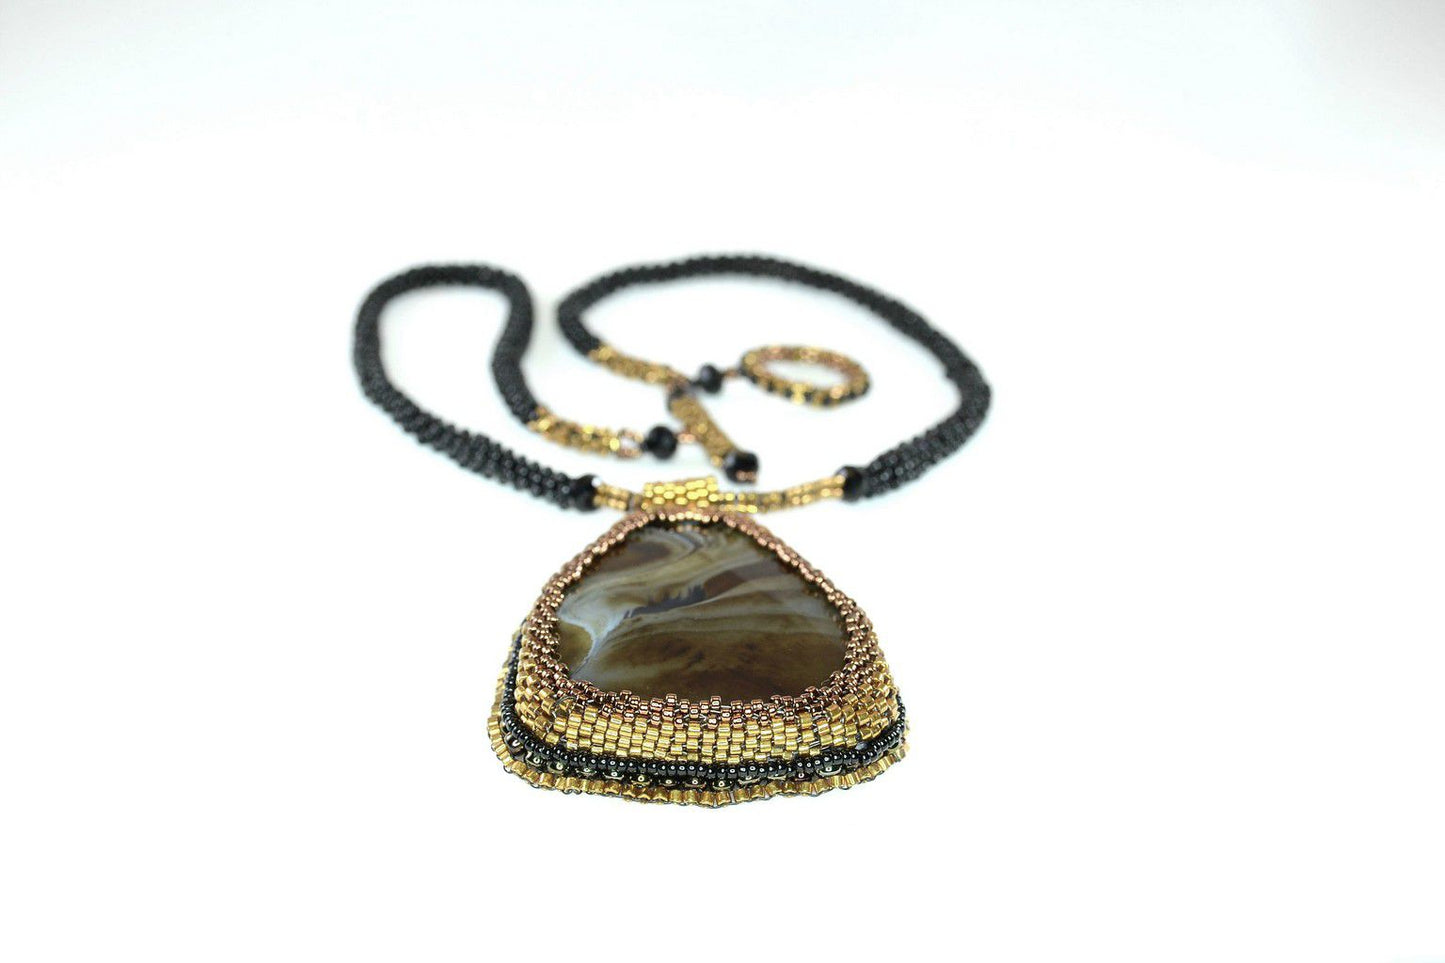 Stunning faceted agate statement necklace with gold beaded bezel and fully beaded chain in black and gold